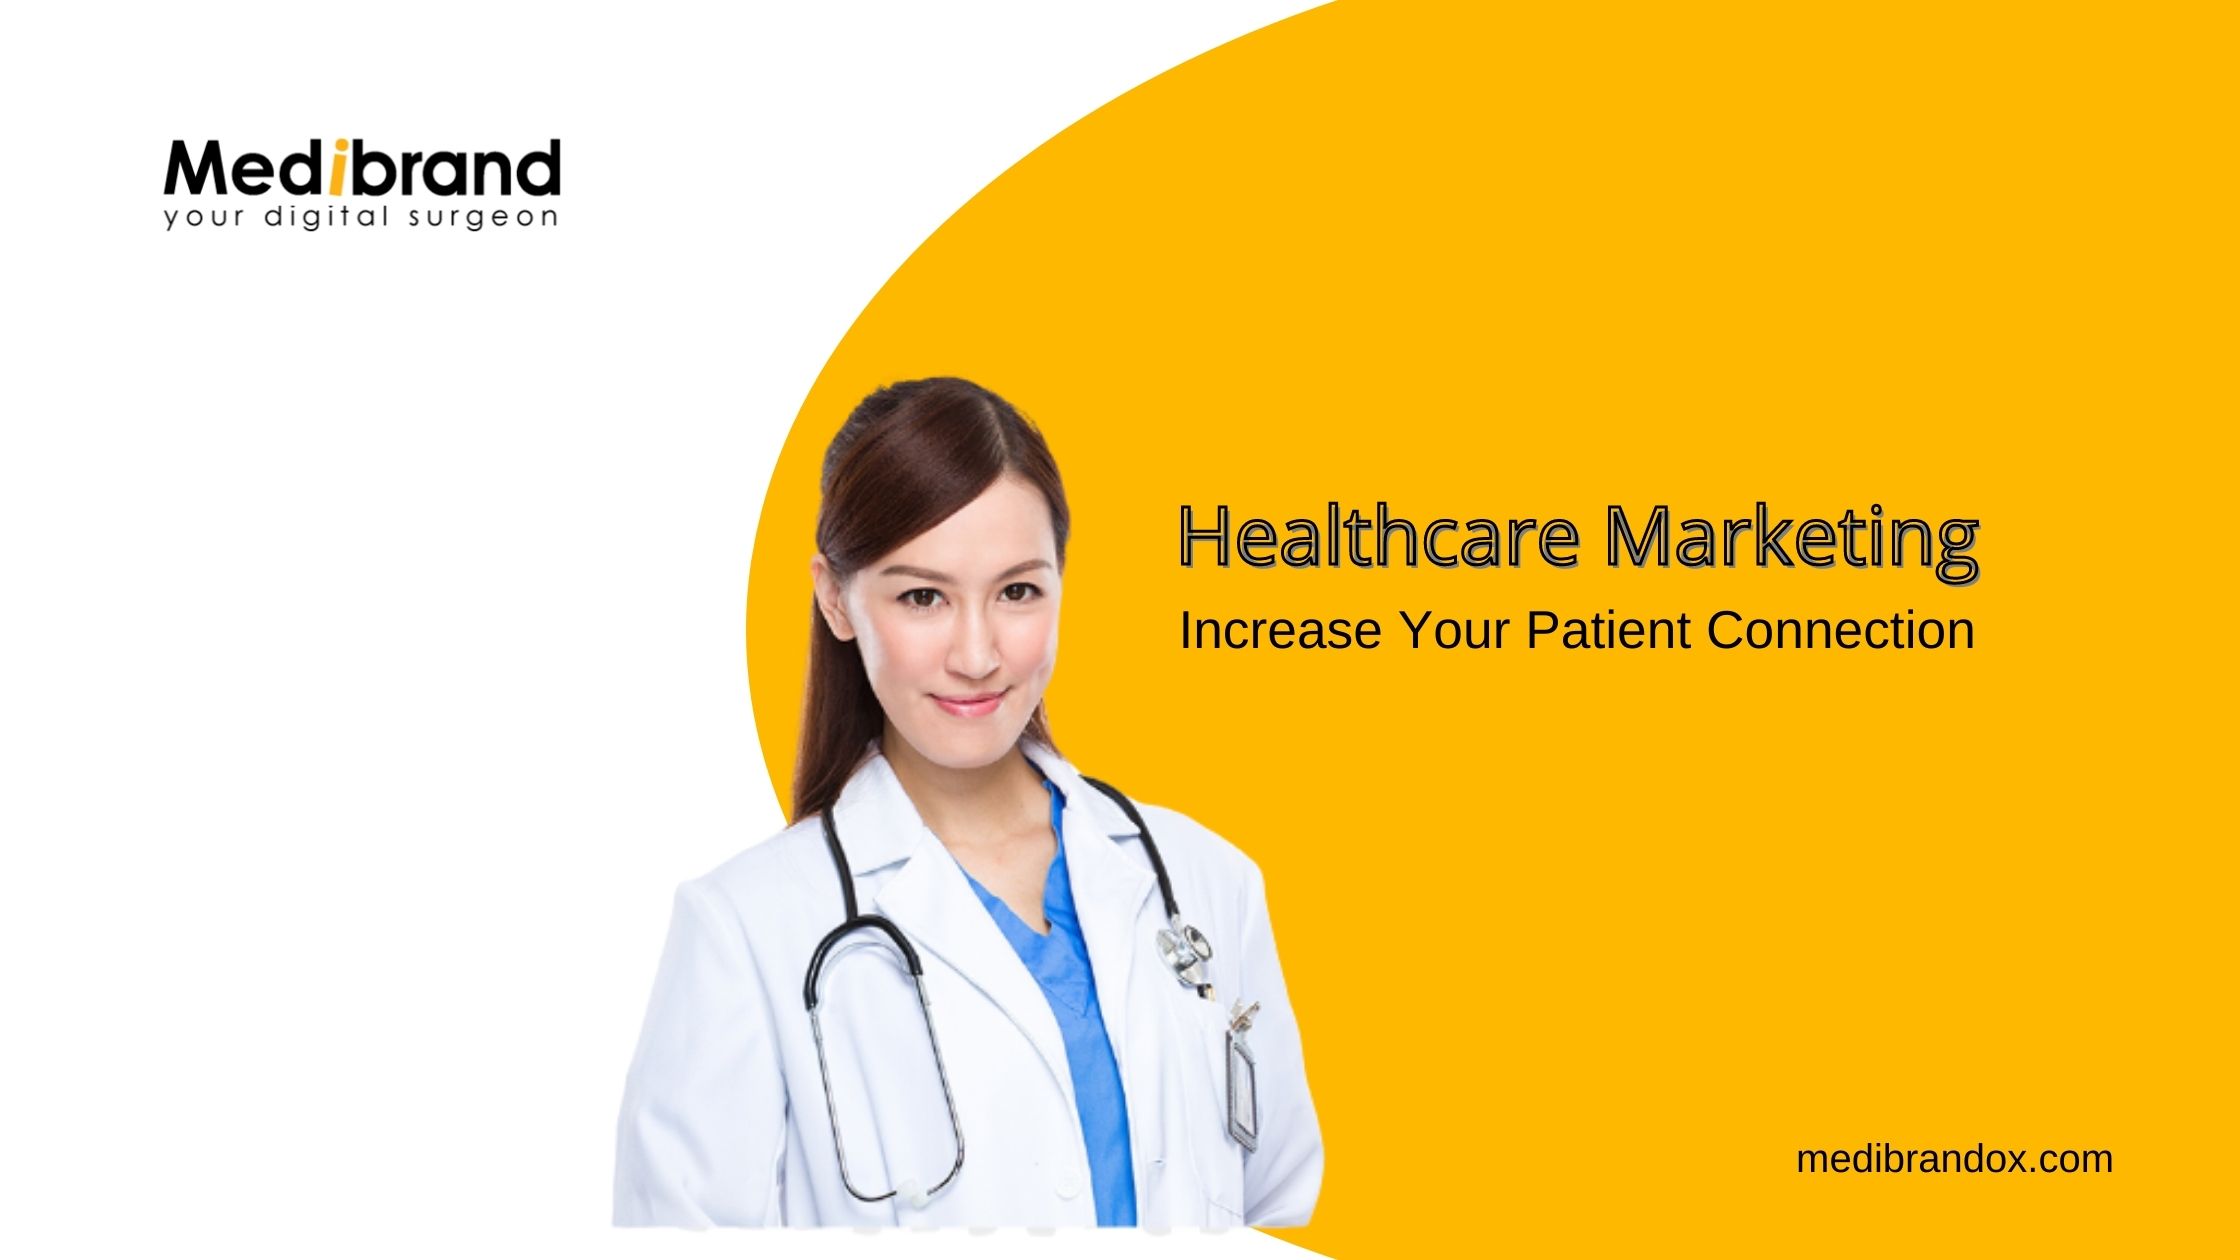 Article about Healthcare Marketing Help To Increase Your Patient Connection